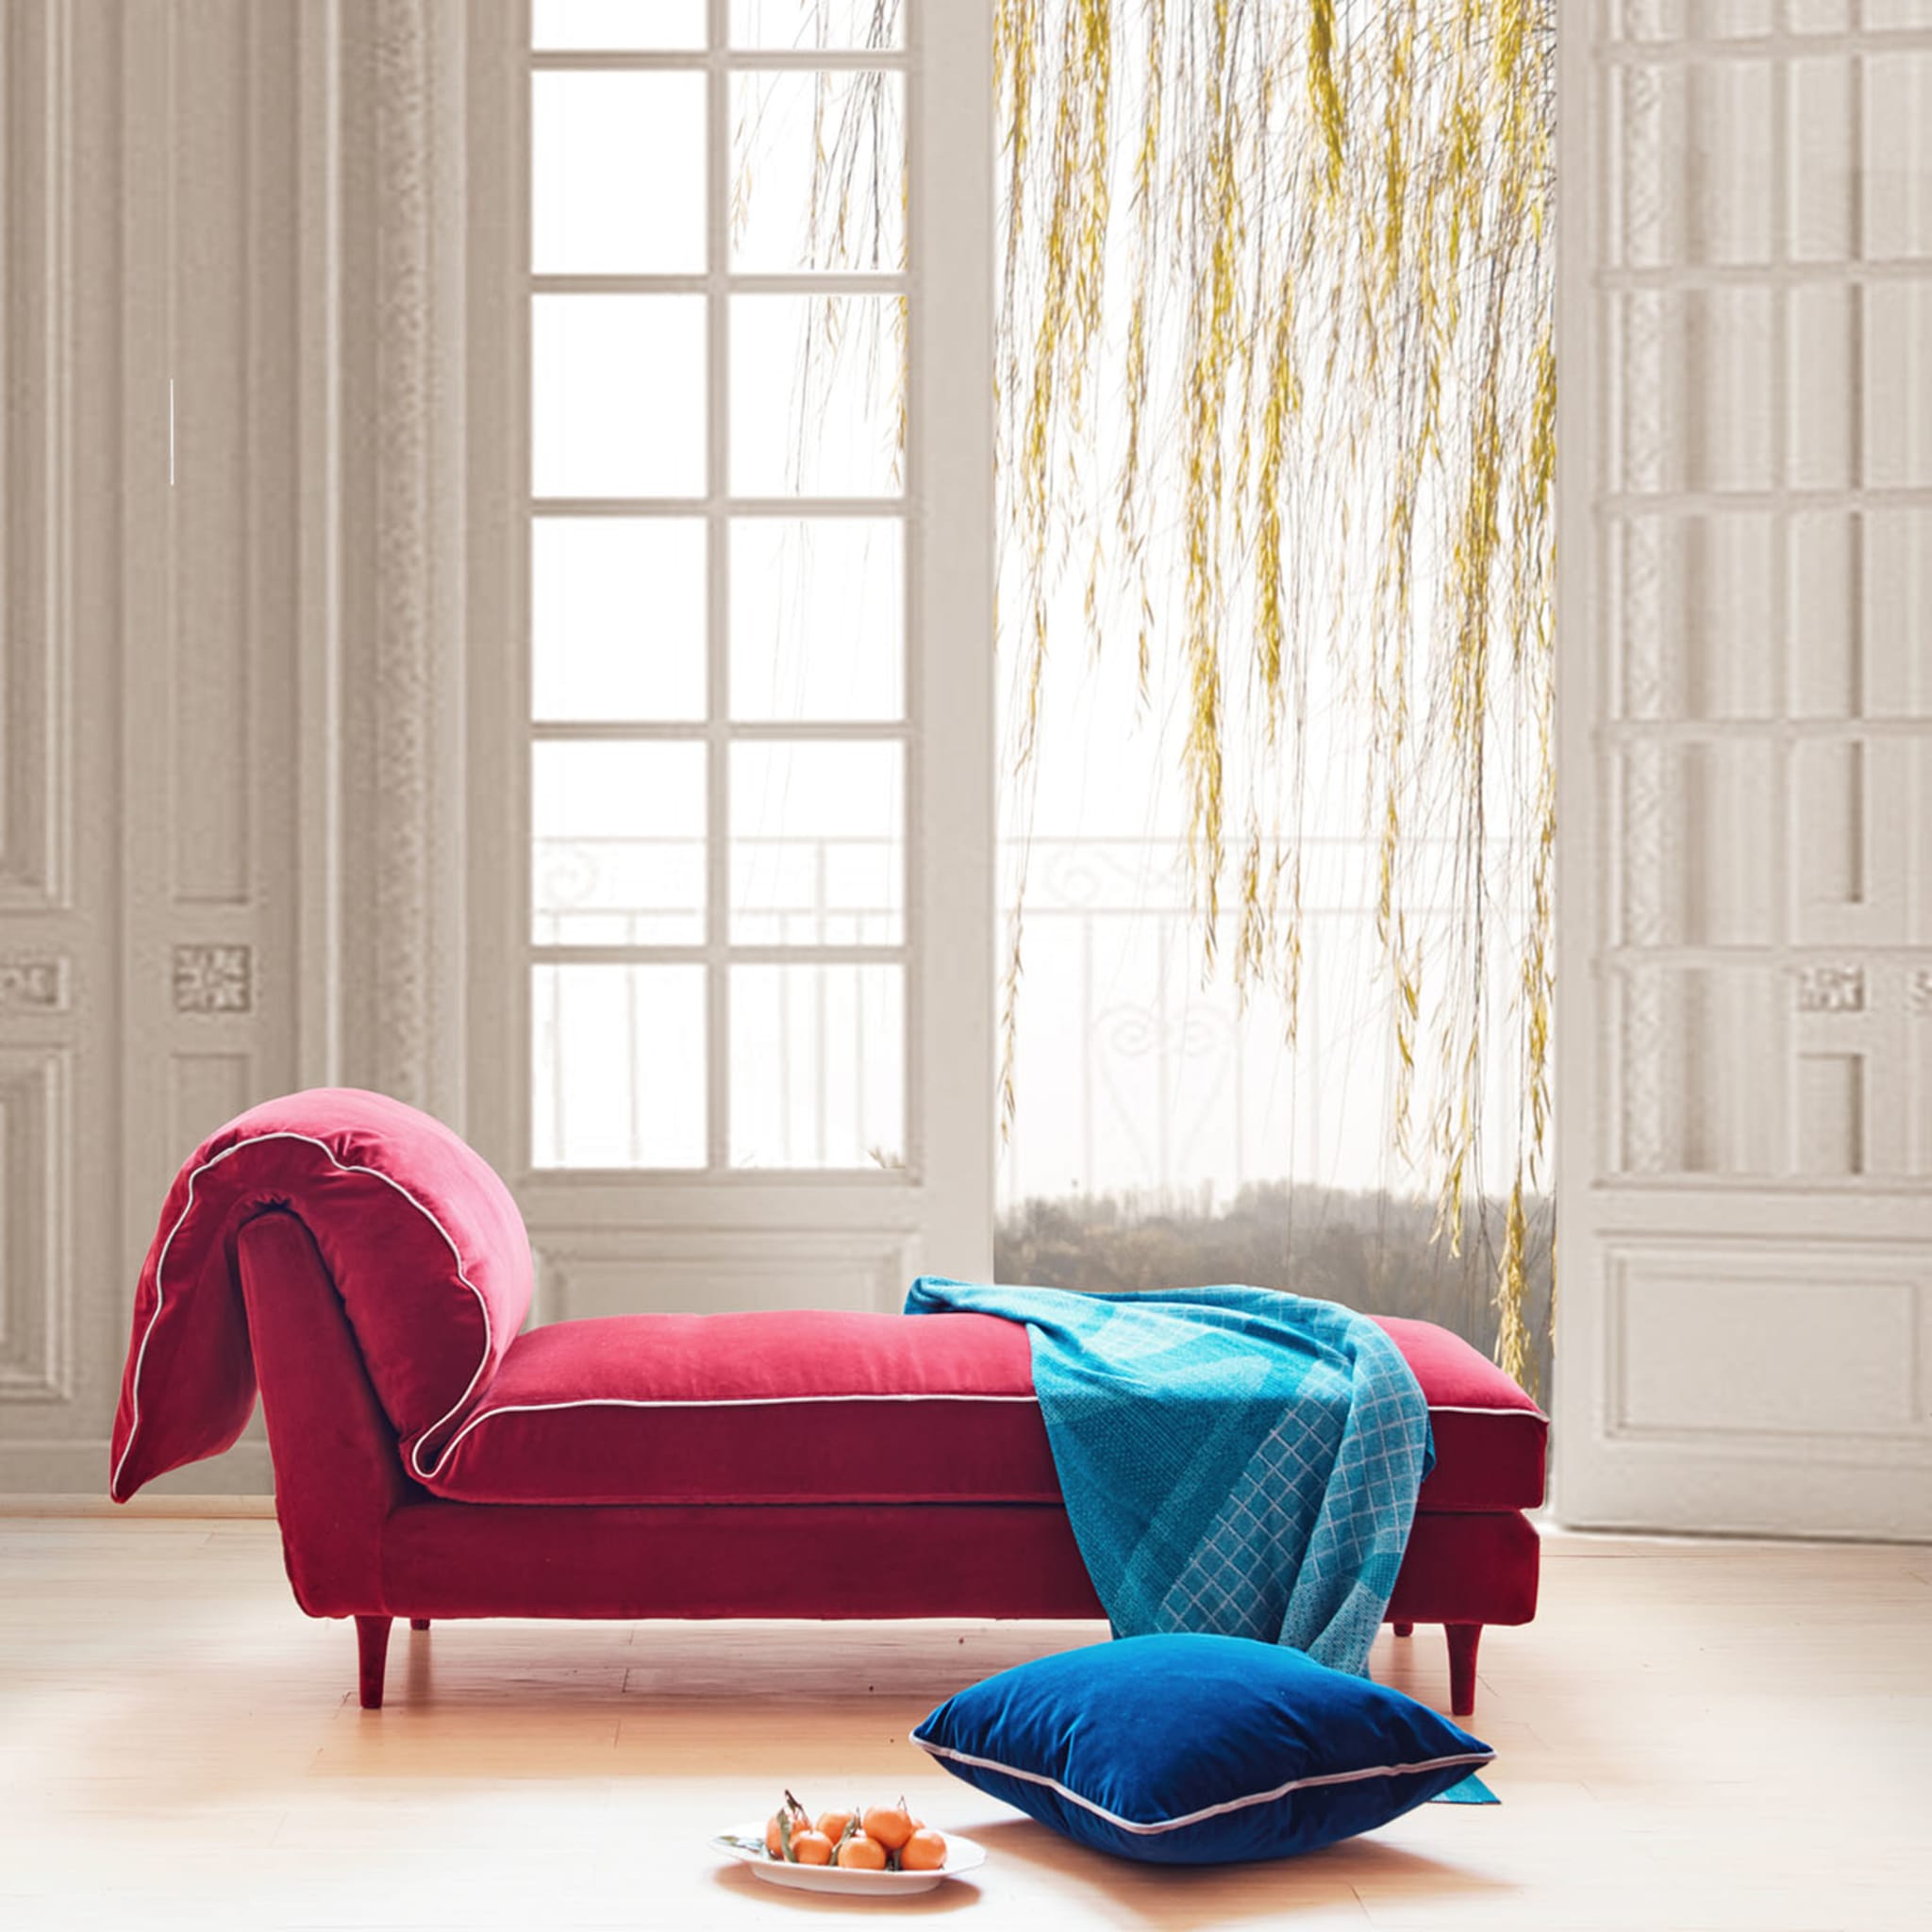 Casquet Red Passion Velvet Daybed - Alternative view 5